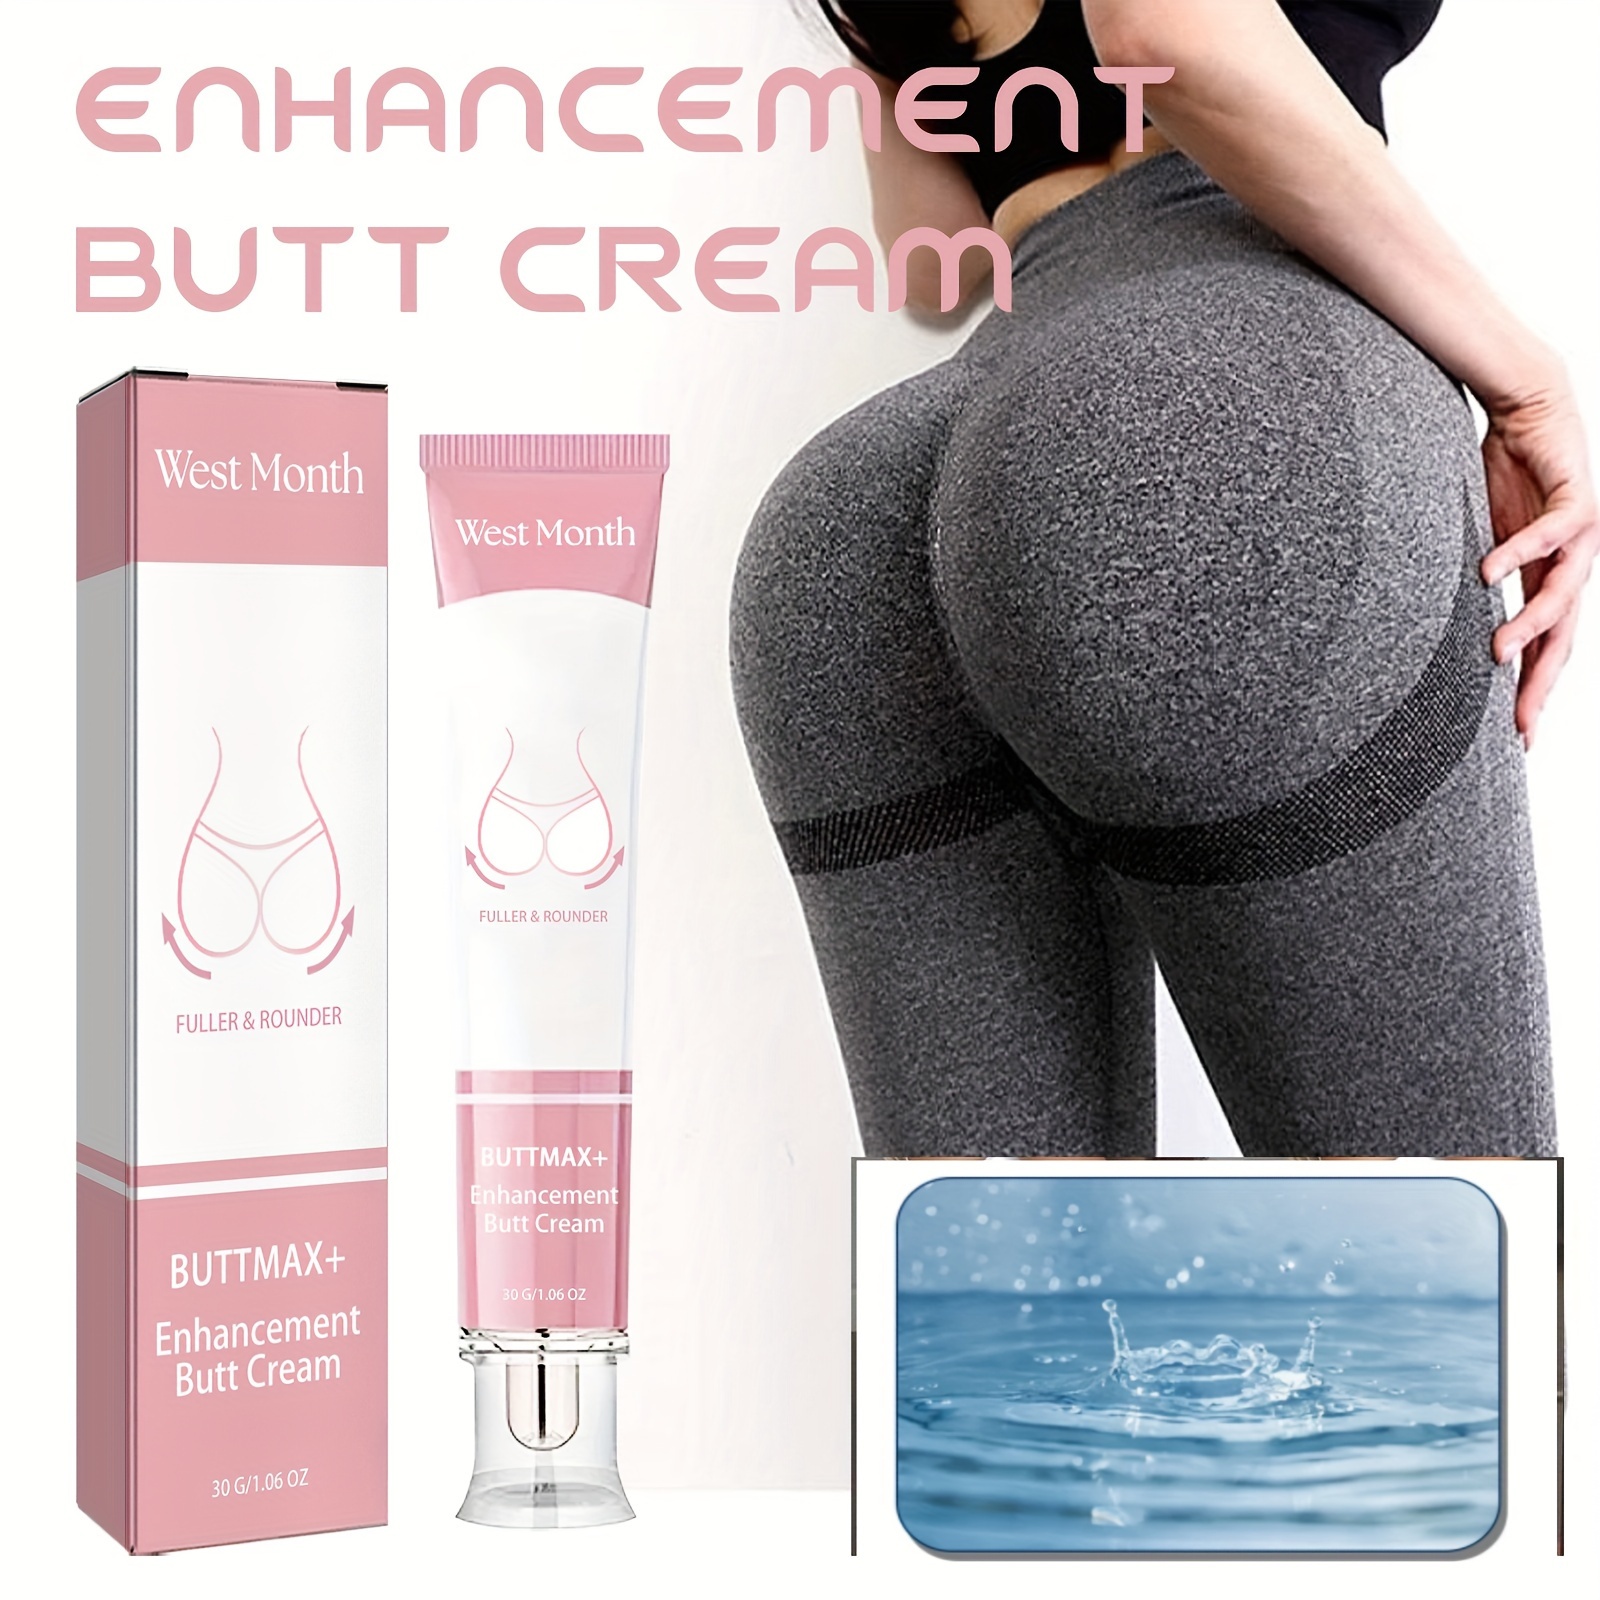 A Dark Ass Enlargement Secret For Naturally Getting Bigger Butt Fast And  Easily, eBook by Elizabeth Jan, 9798201073787